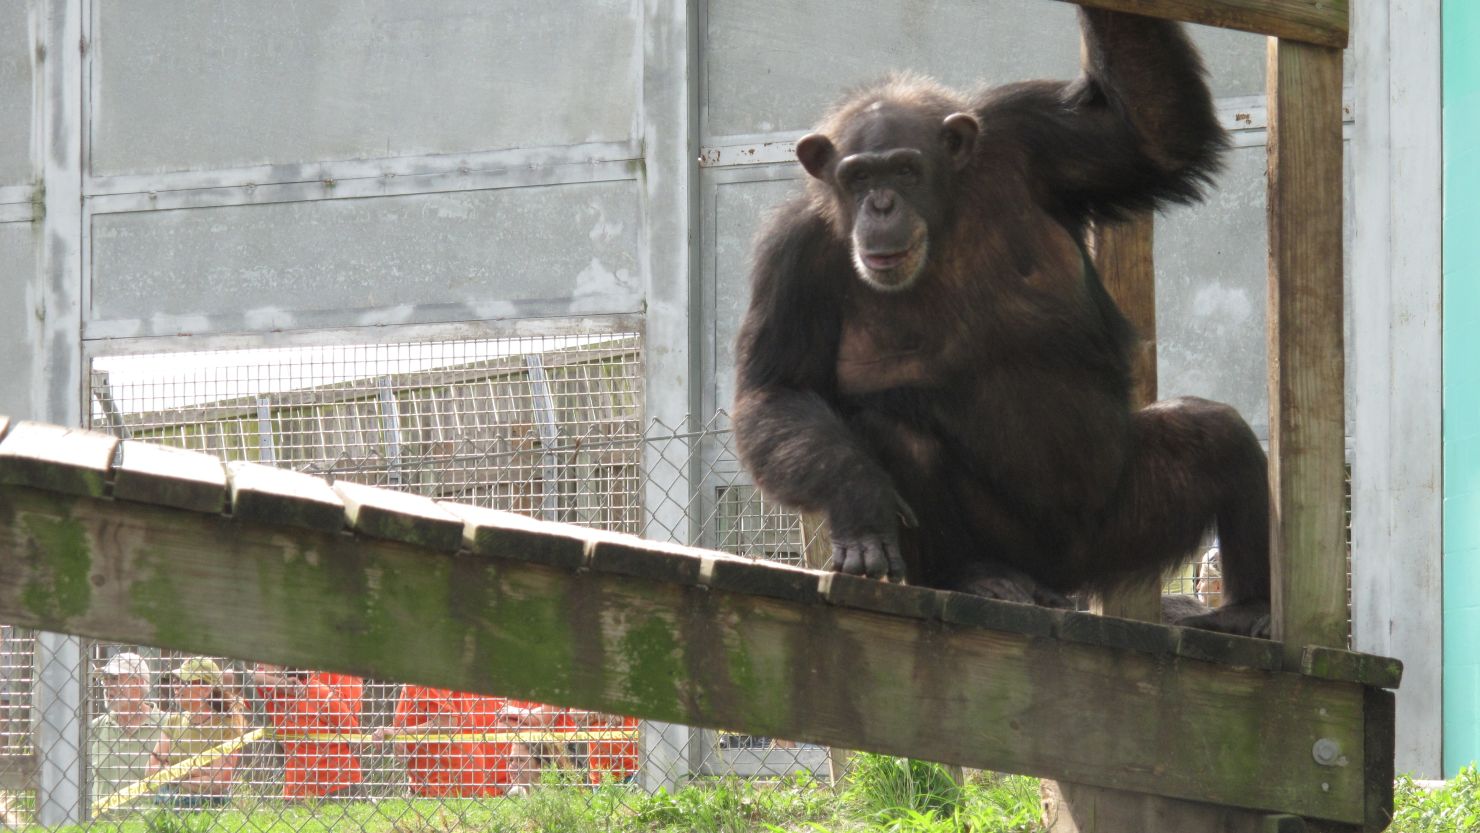 Chimpanzees are not as useful as they once were for biomedical research, experts say.